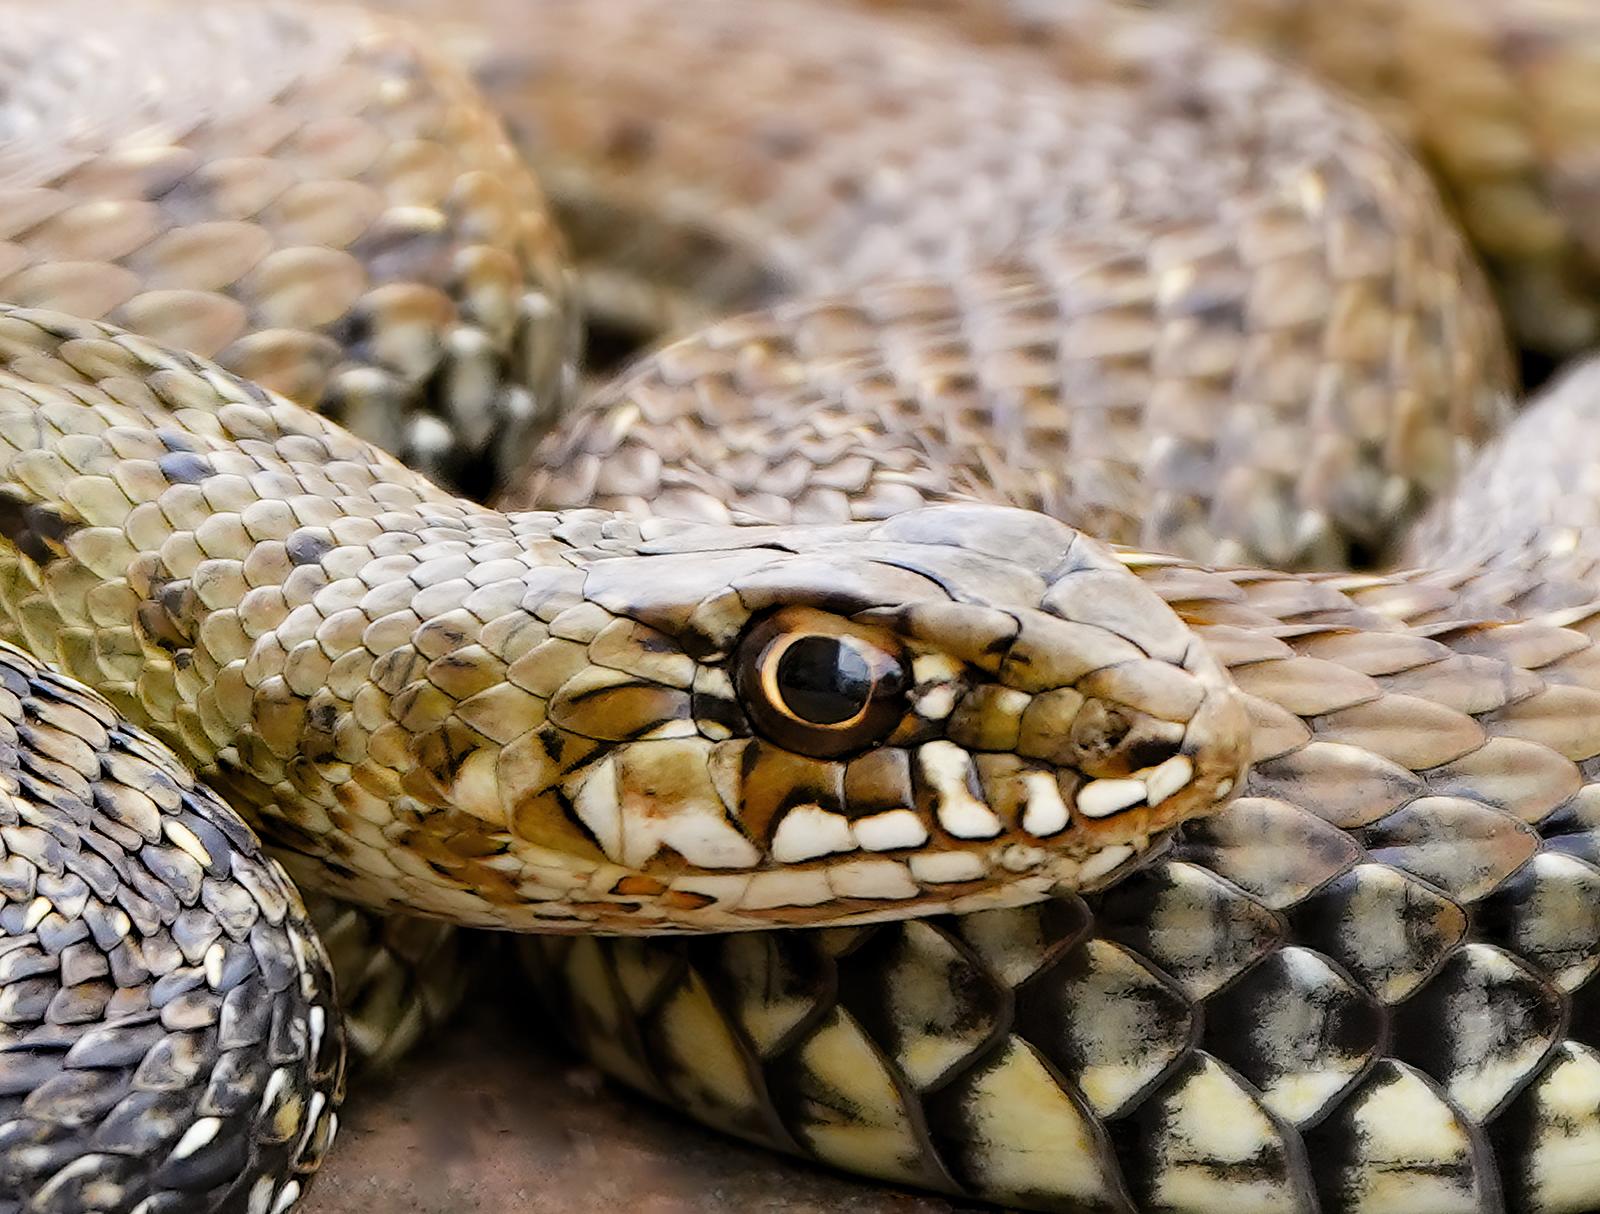 Snake - Signed limited fine art print, Panoramic, Contemporary close-up, Reptile - Brown Color Photograph by Saskia Van de Meeberg